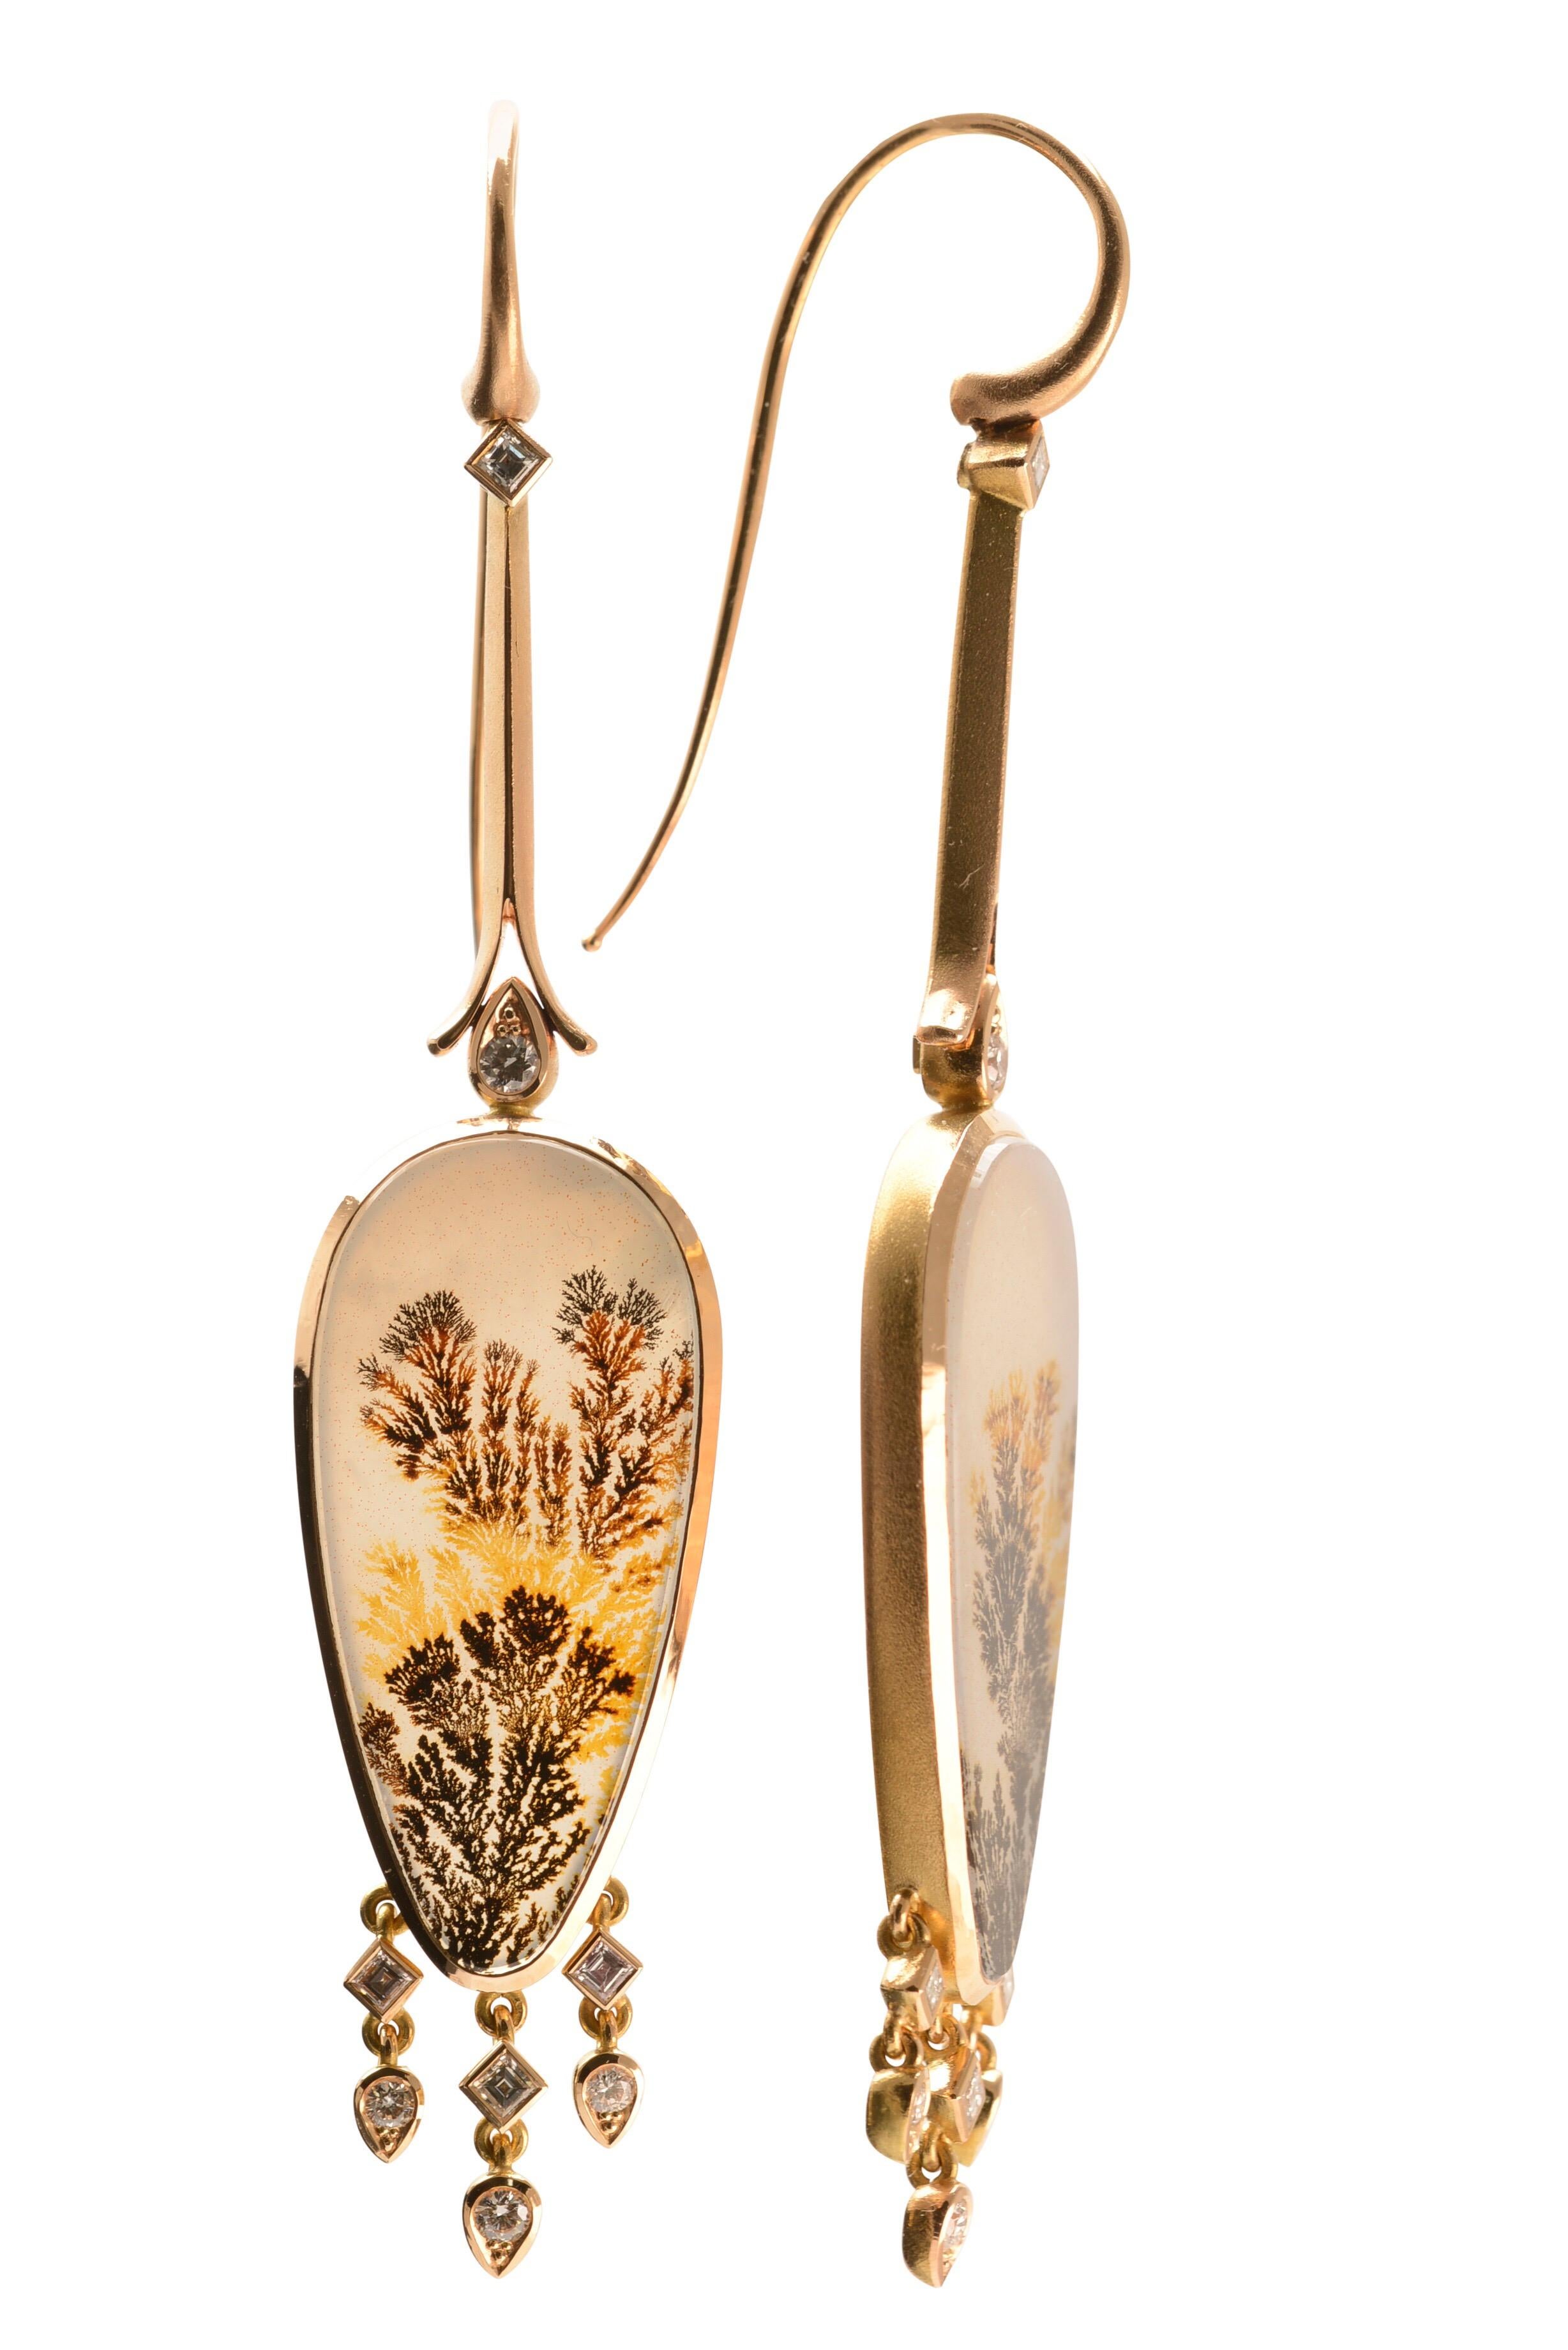 Hand picked for their unreplicable beauty is a pair of dendritic agate's 